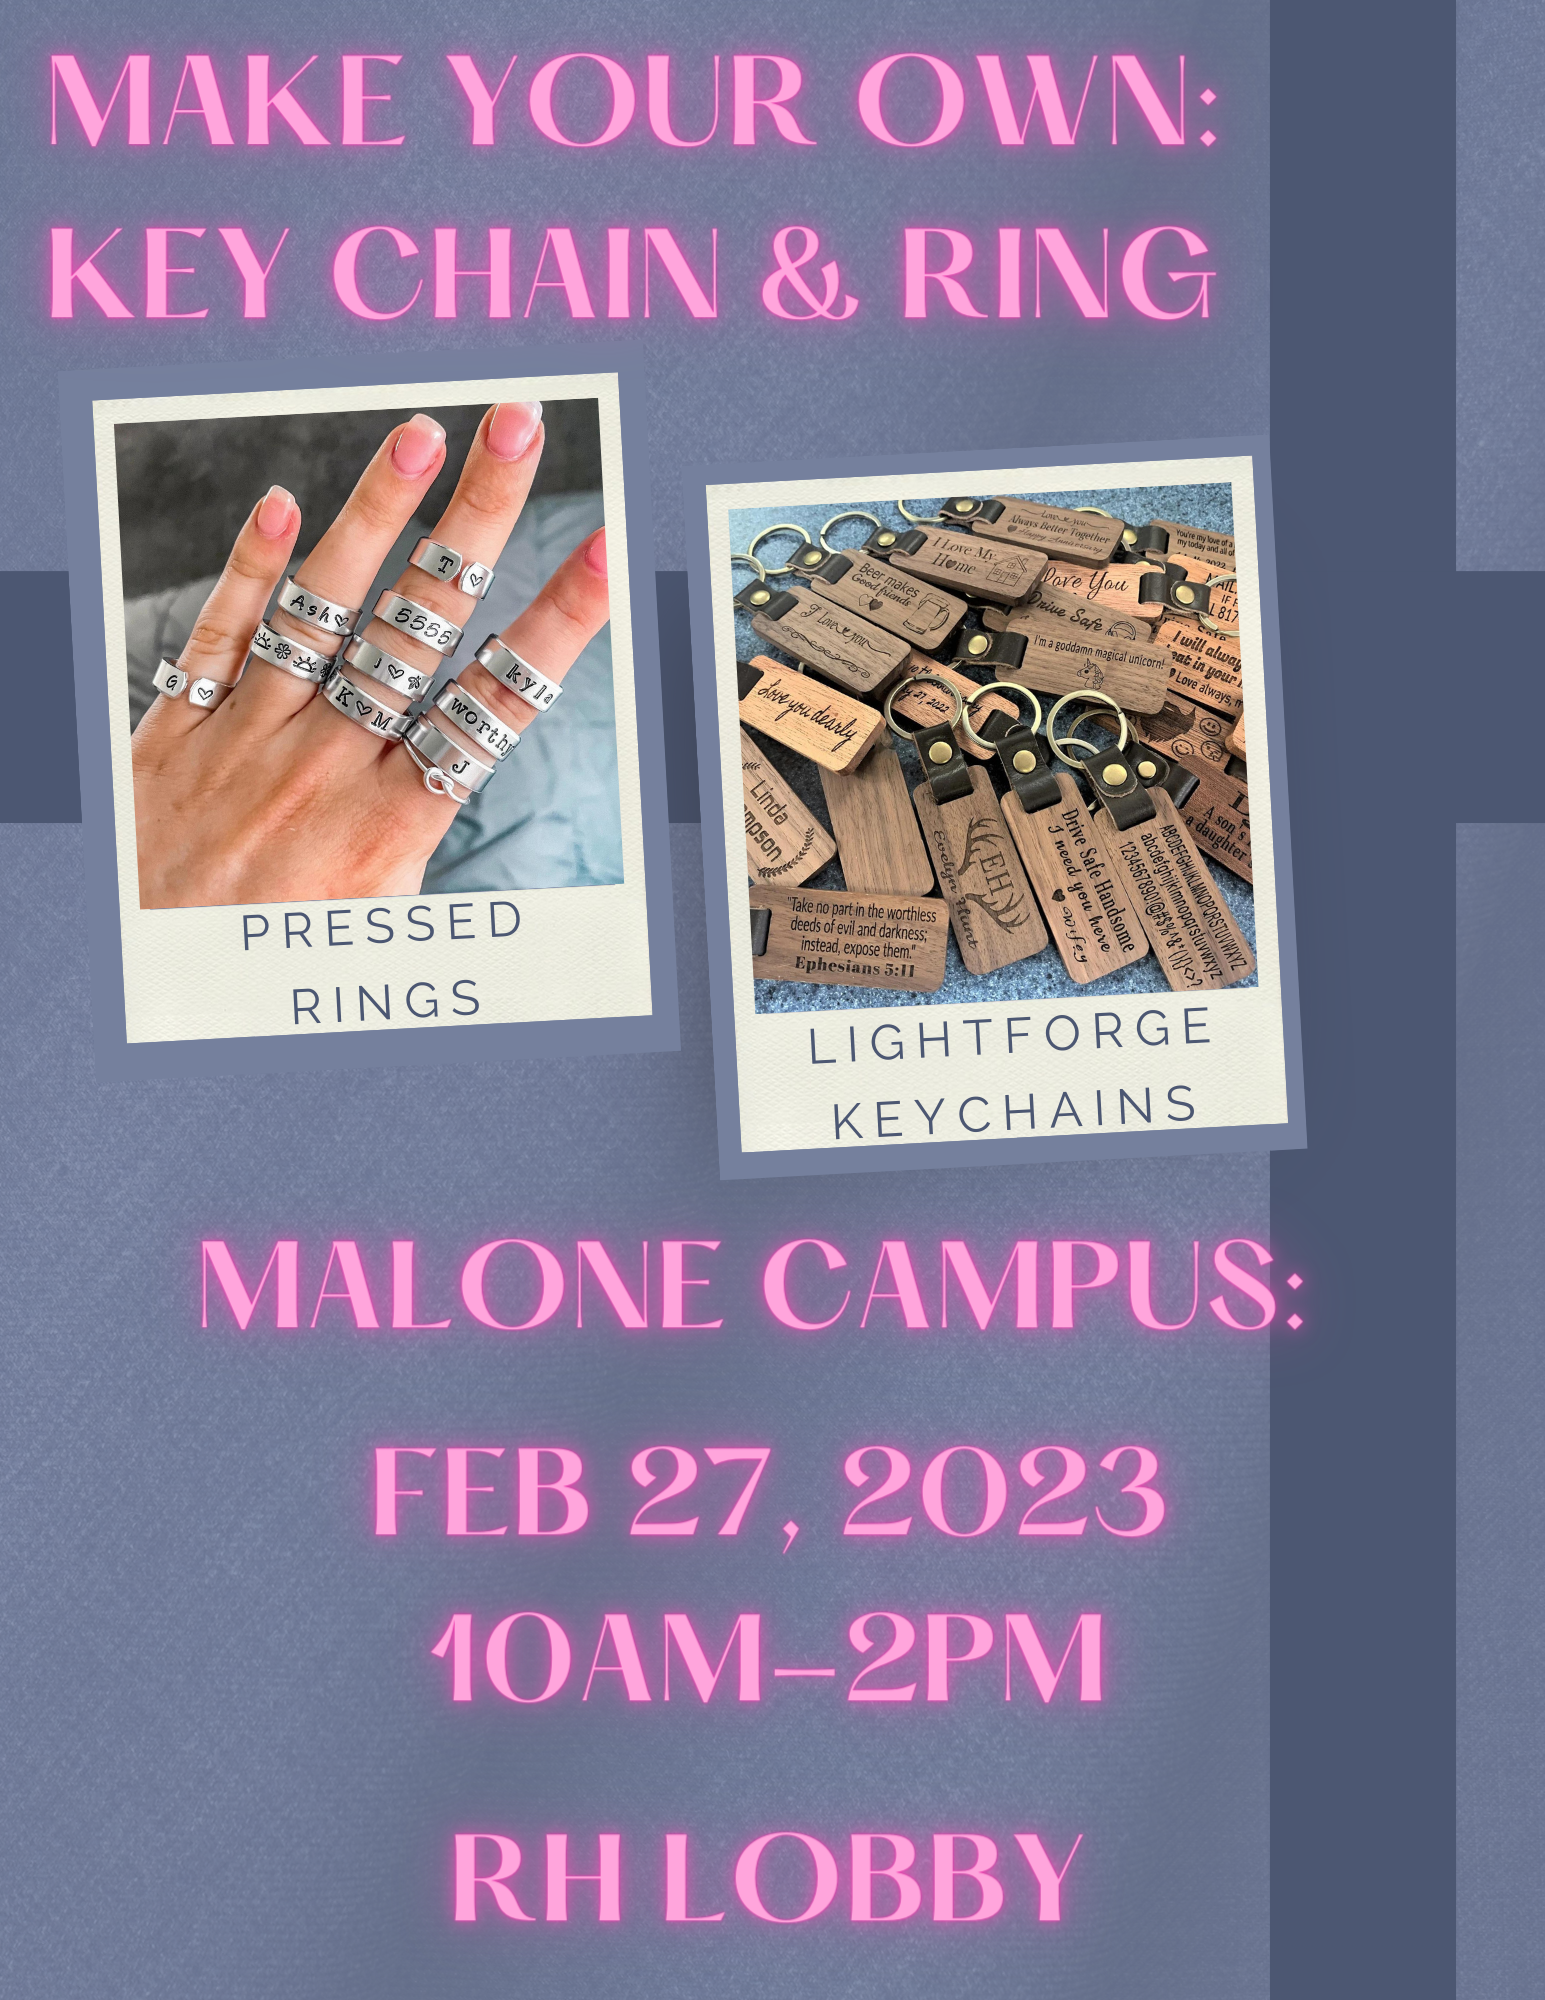 Make Your Own Key Chain & Rings - Malone Campus